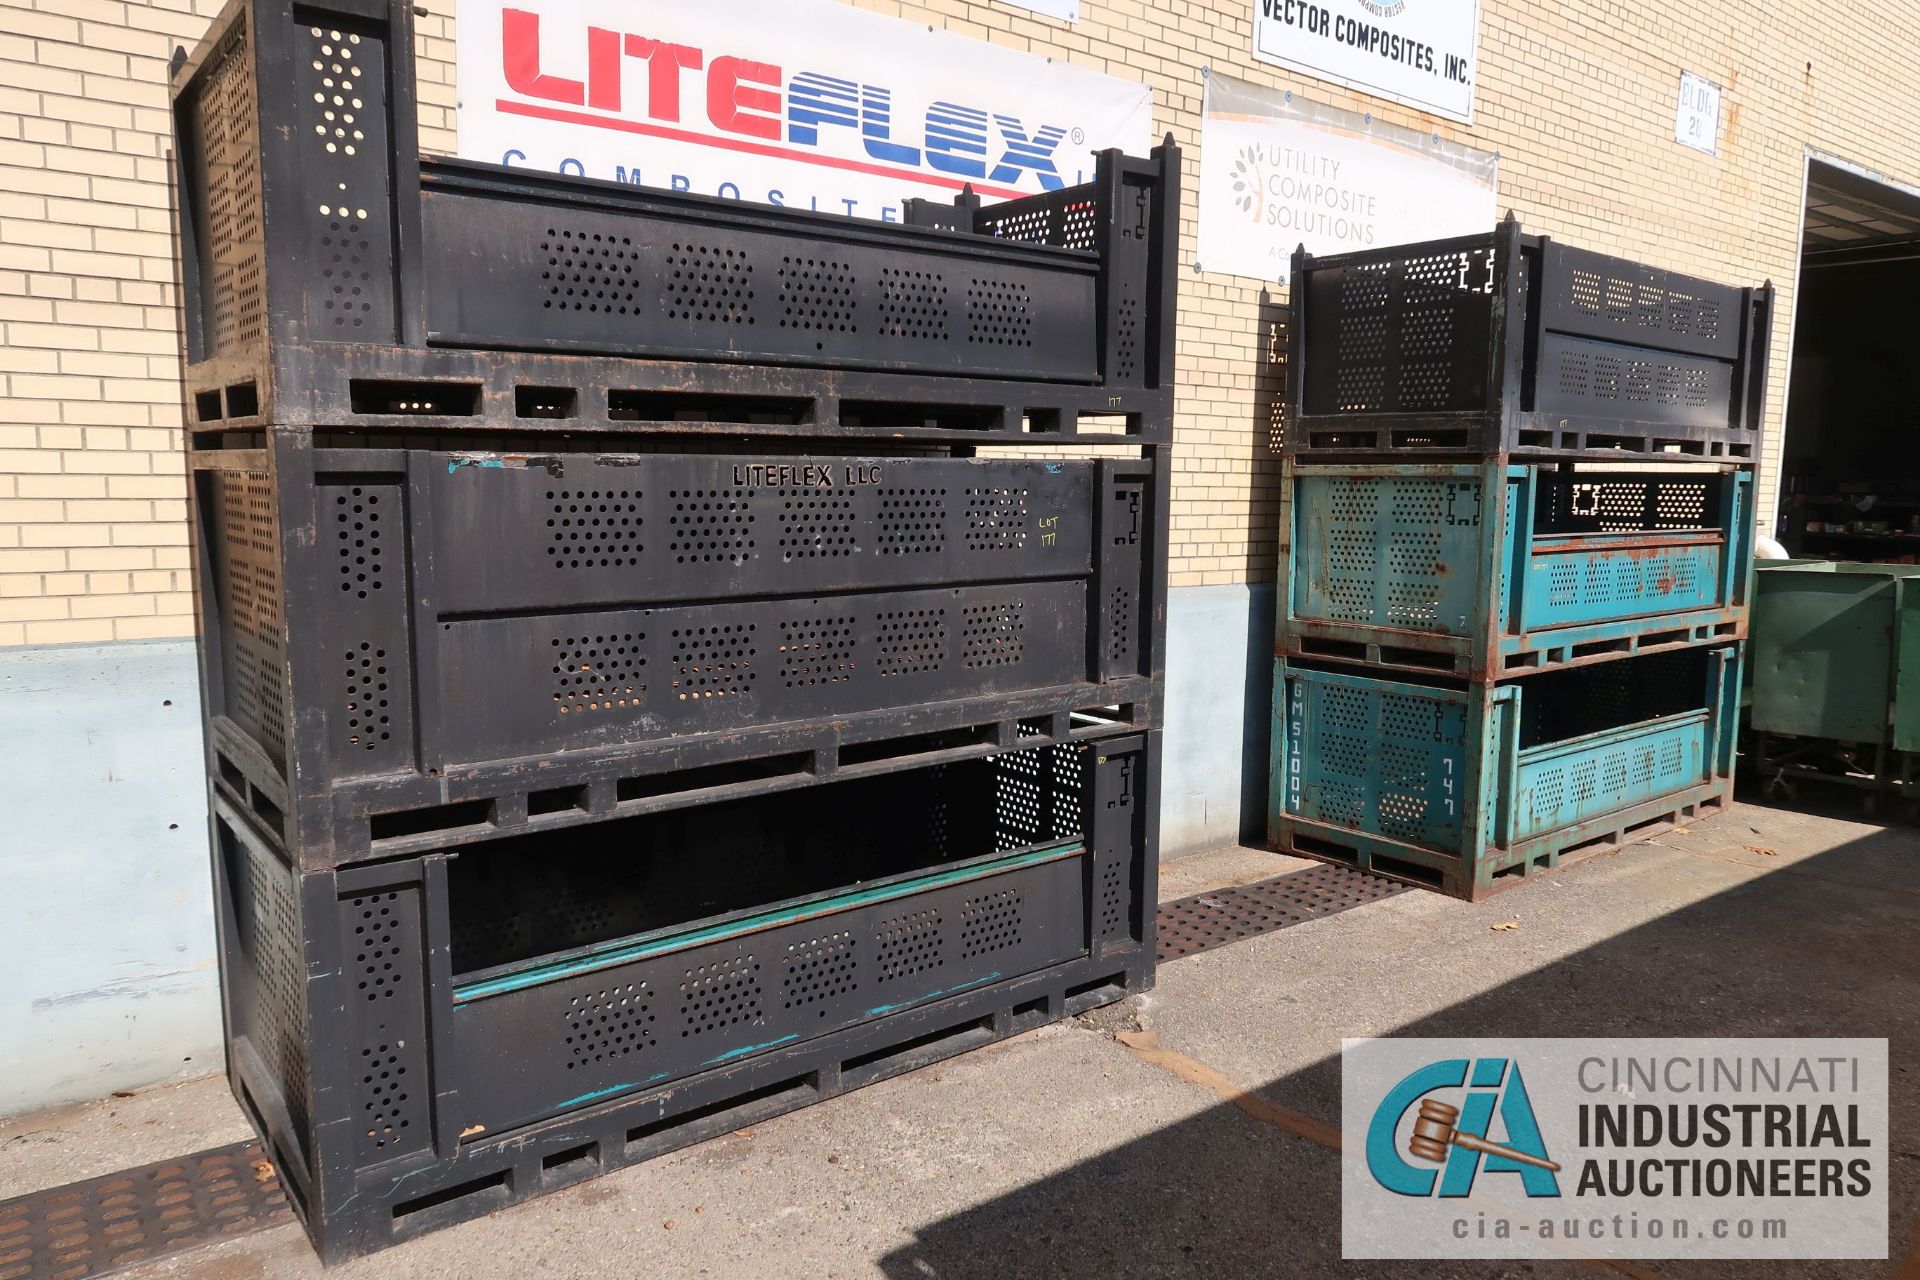 108" X 44" X 38" HEAVY DUTY STEEL STACKING PARTS BASKETS